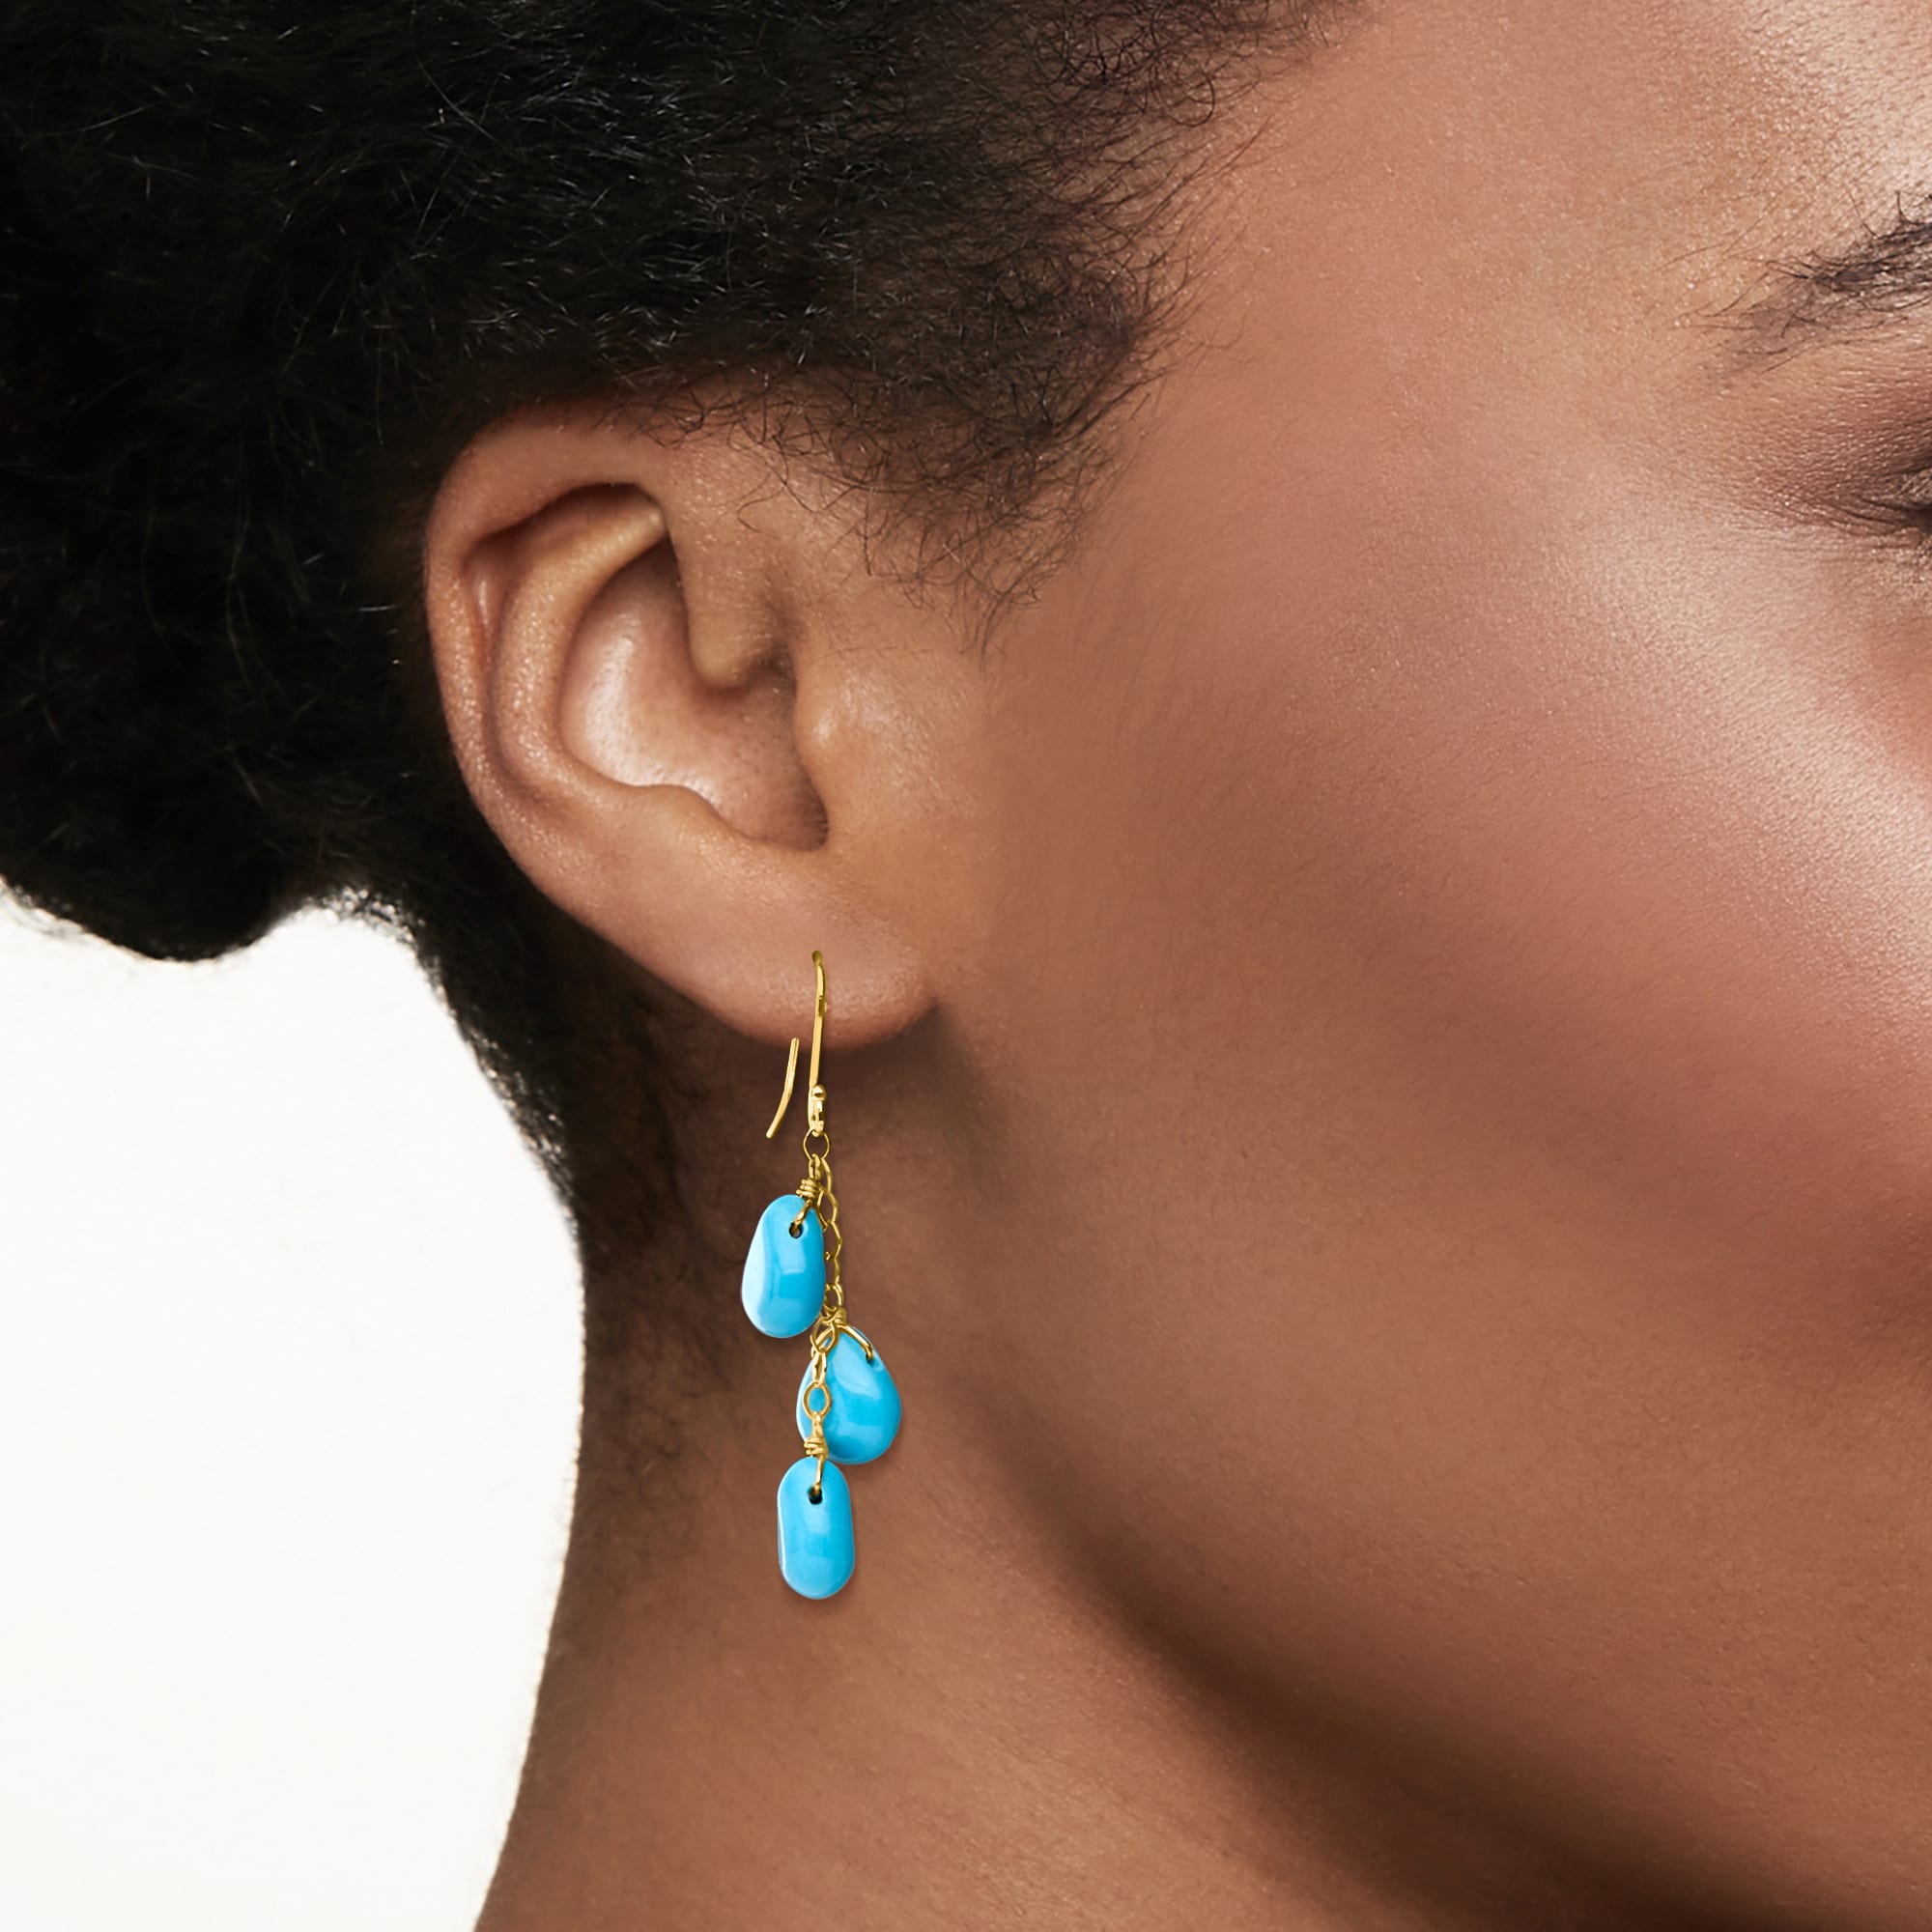 Turquoise Drop Earrings in 14kt Yellow Gold | Ross-Simons